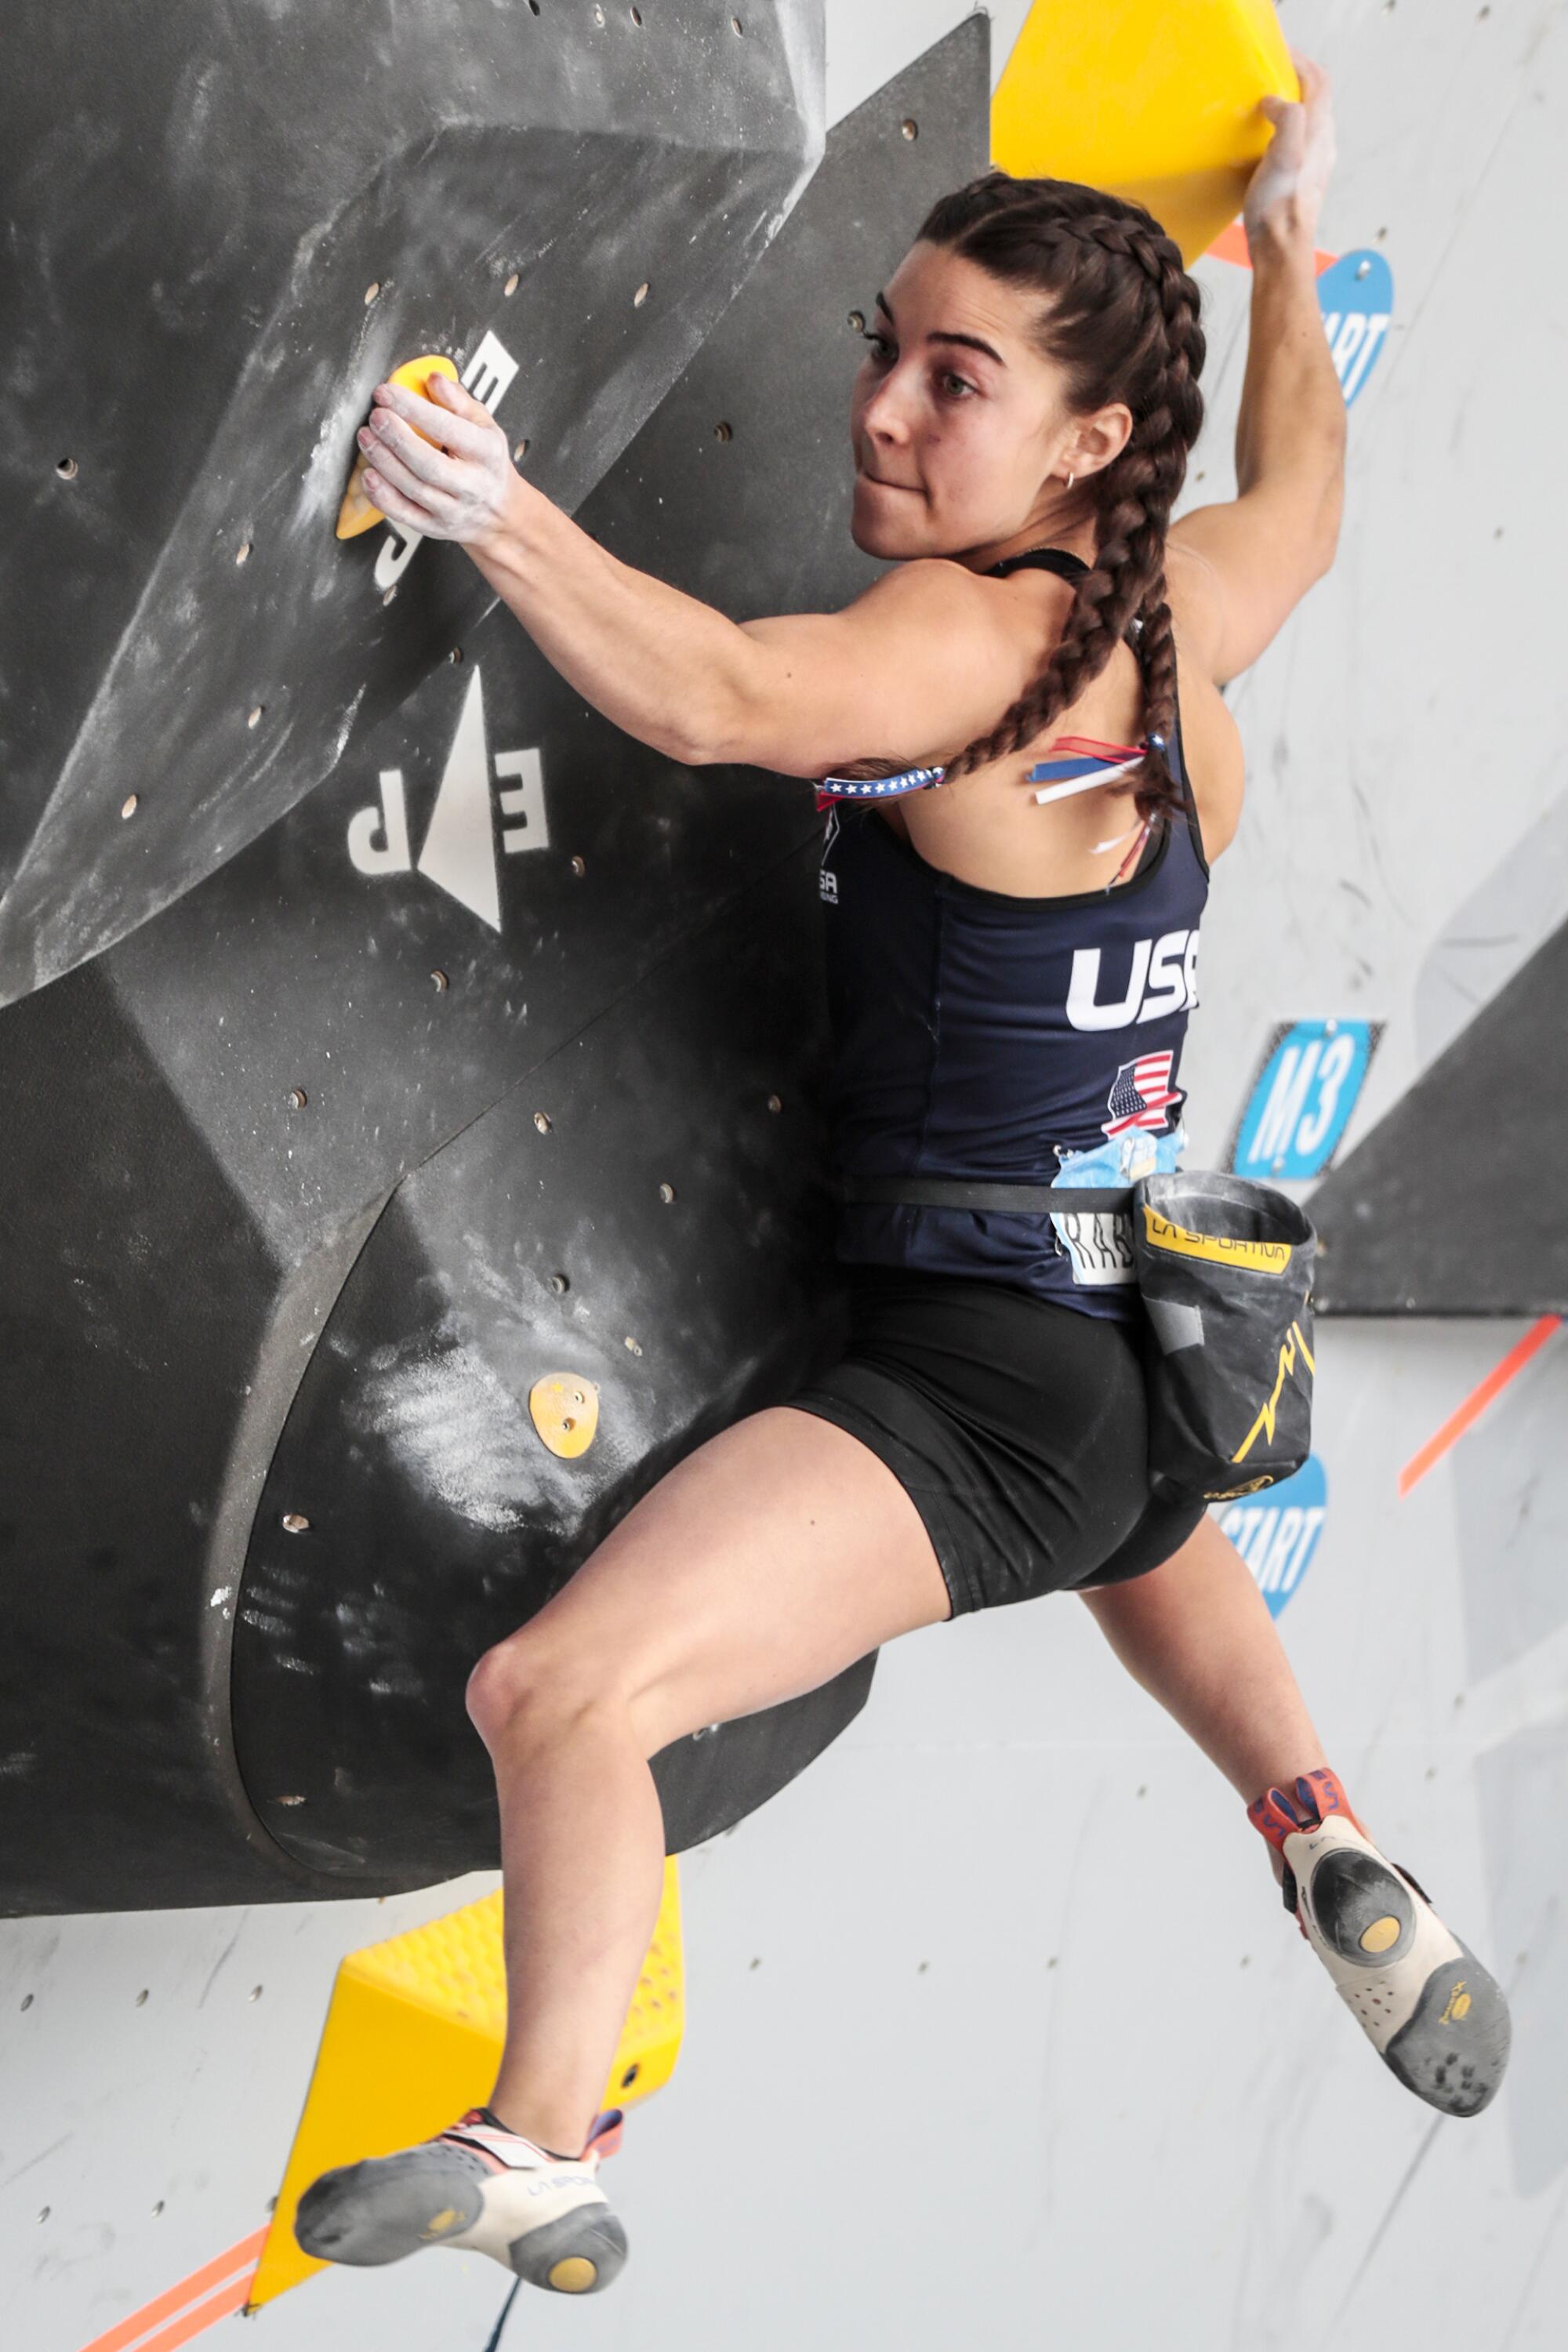 Brooke Raboutou competes in the 2021 IFSC Climbing World Cup.